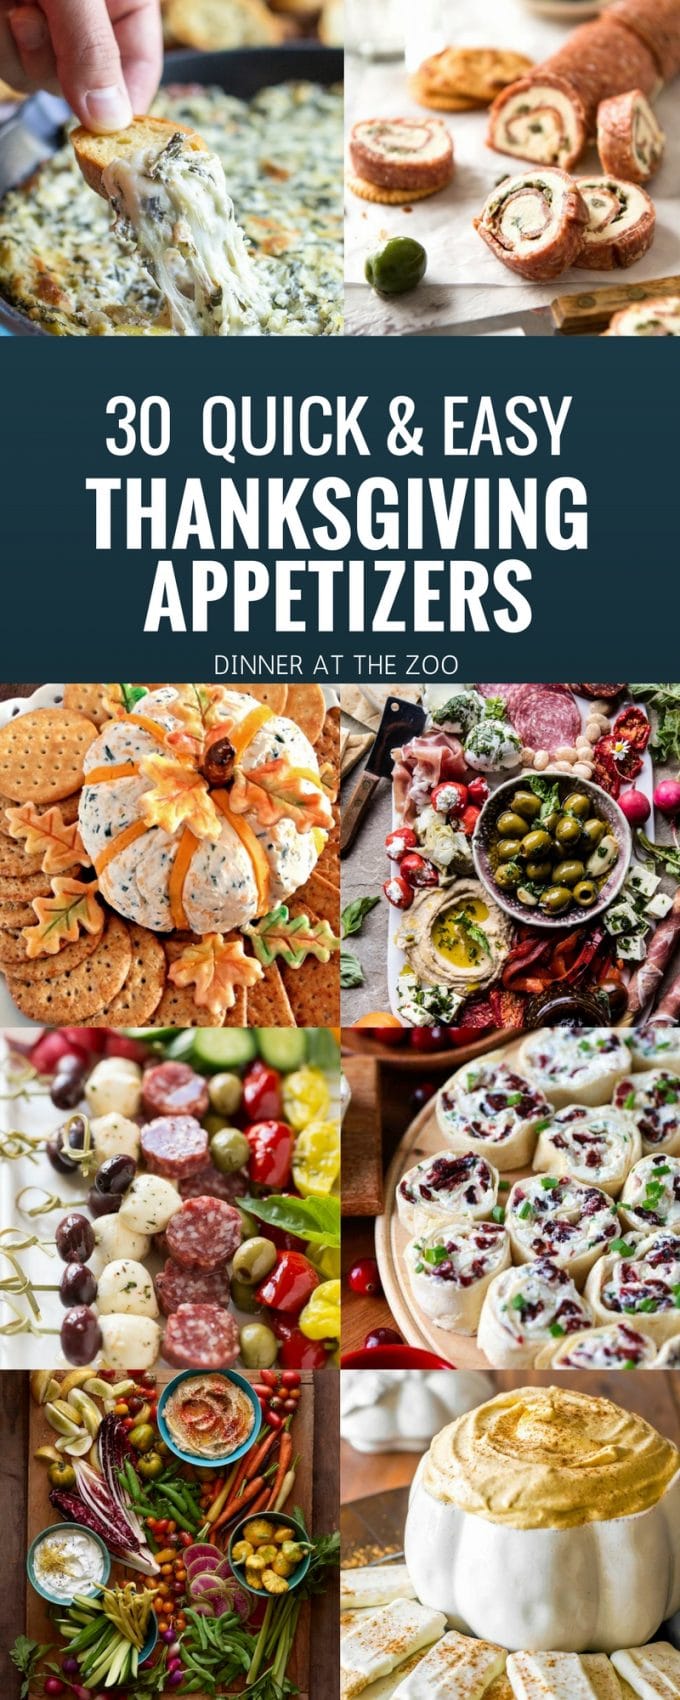 30 Quick and Easy Thanksgiving Appetizer Recipes